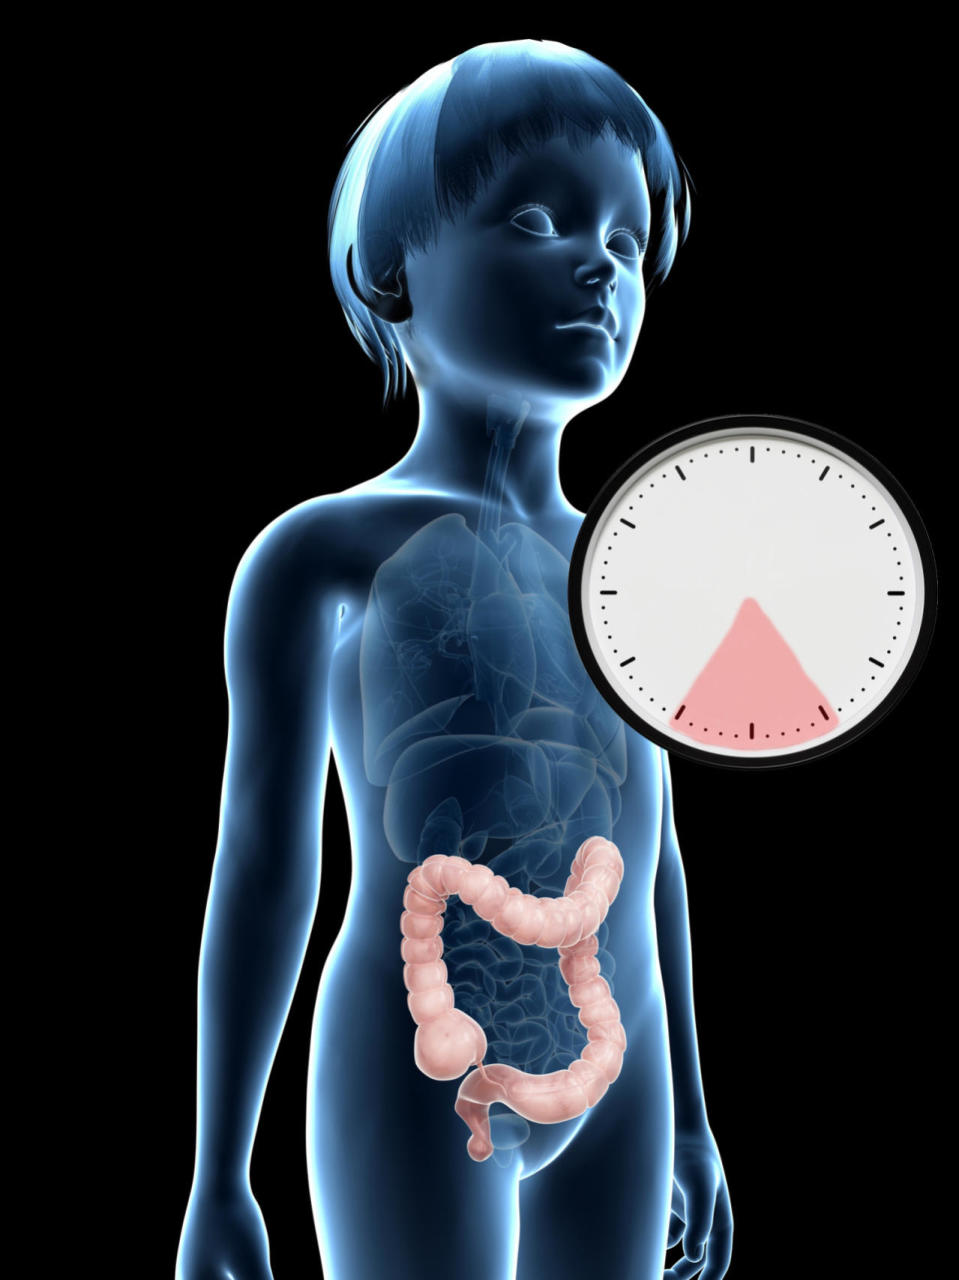 5 to 7 a.m.: Large intestine